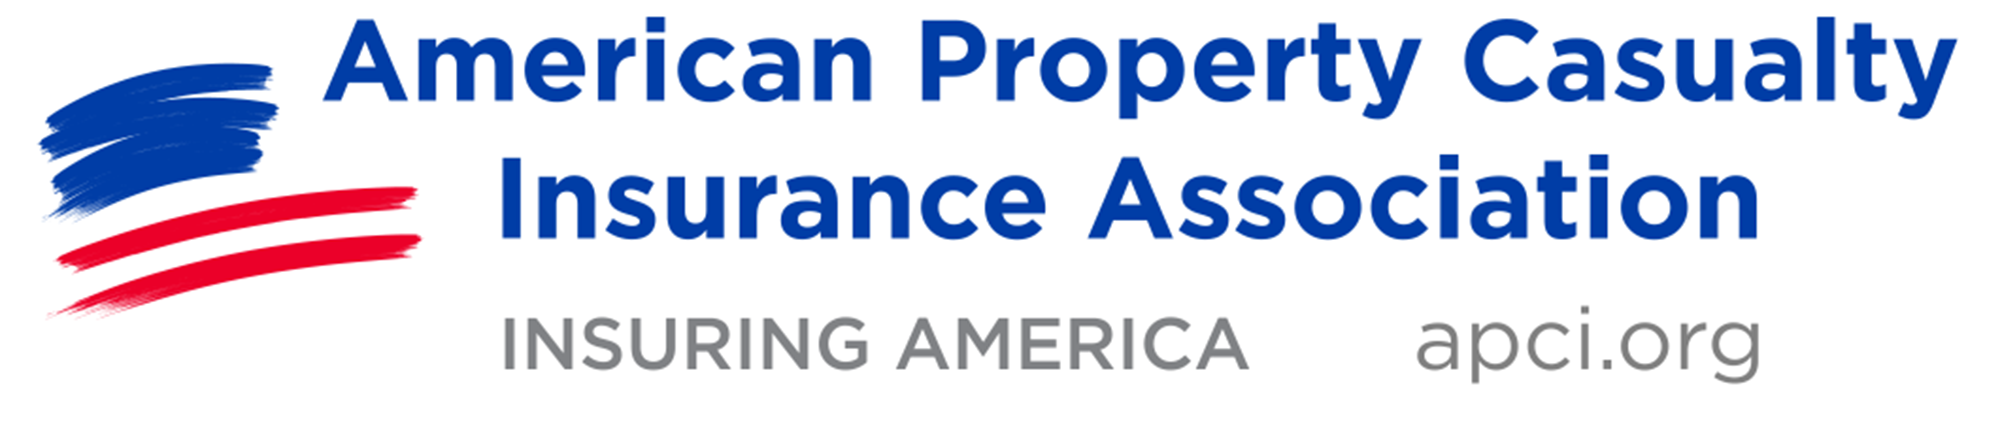 American Property Casualty Insurance Association